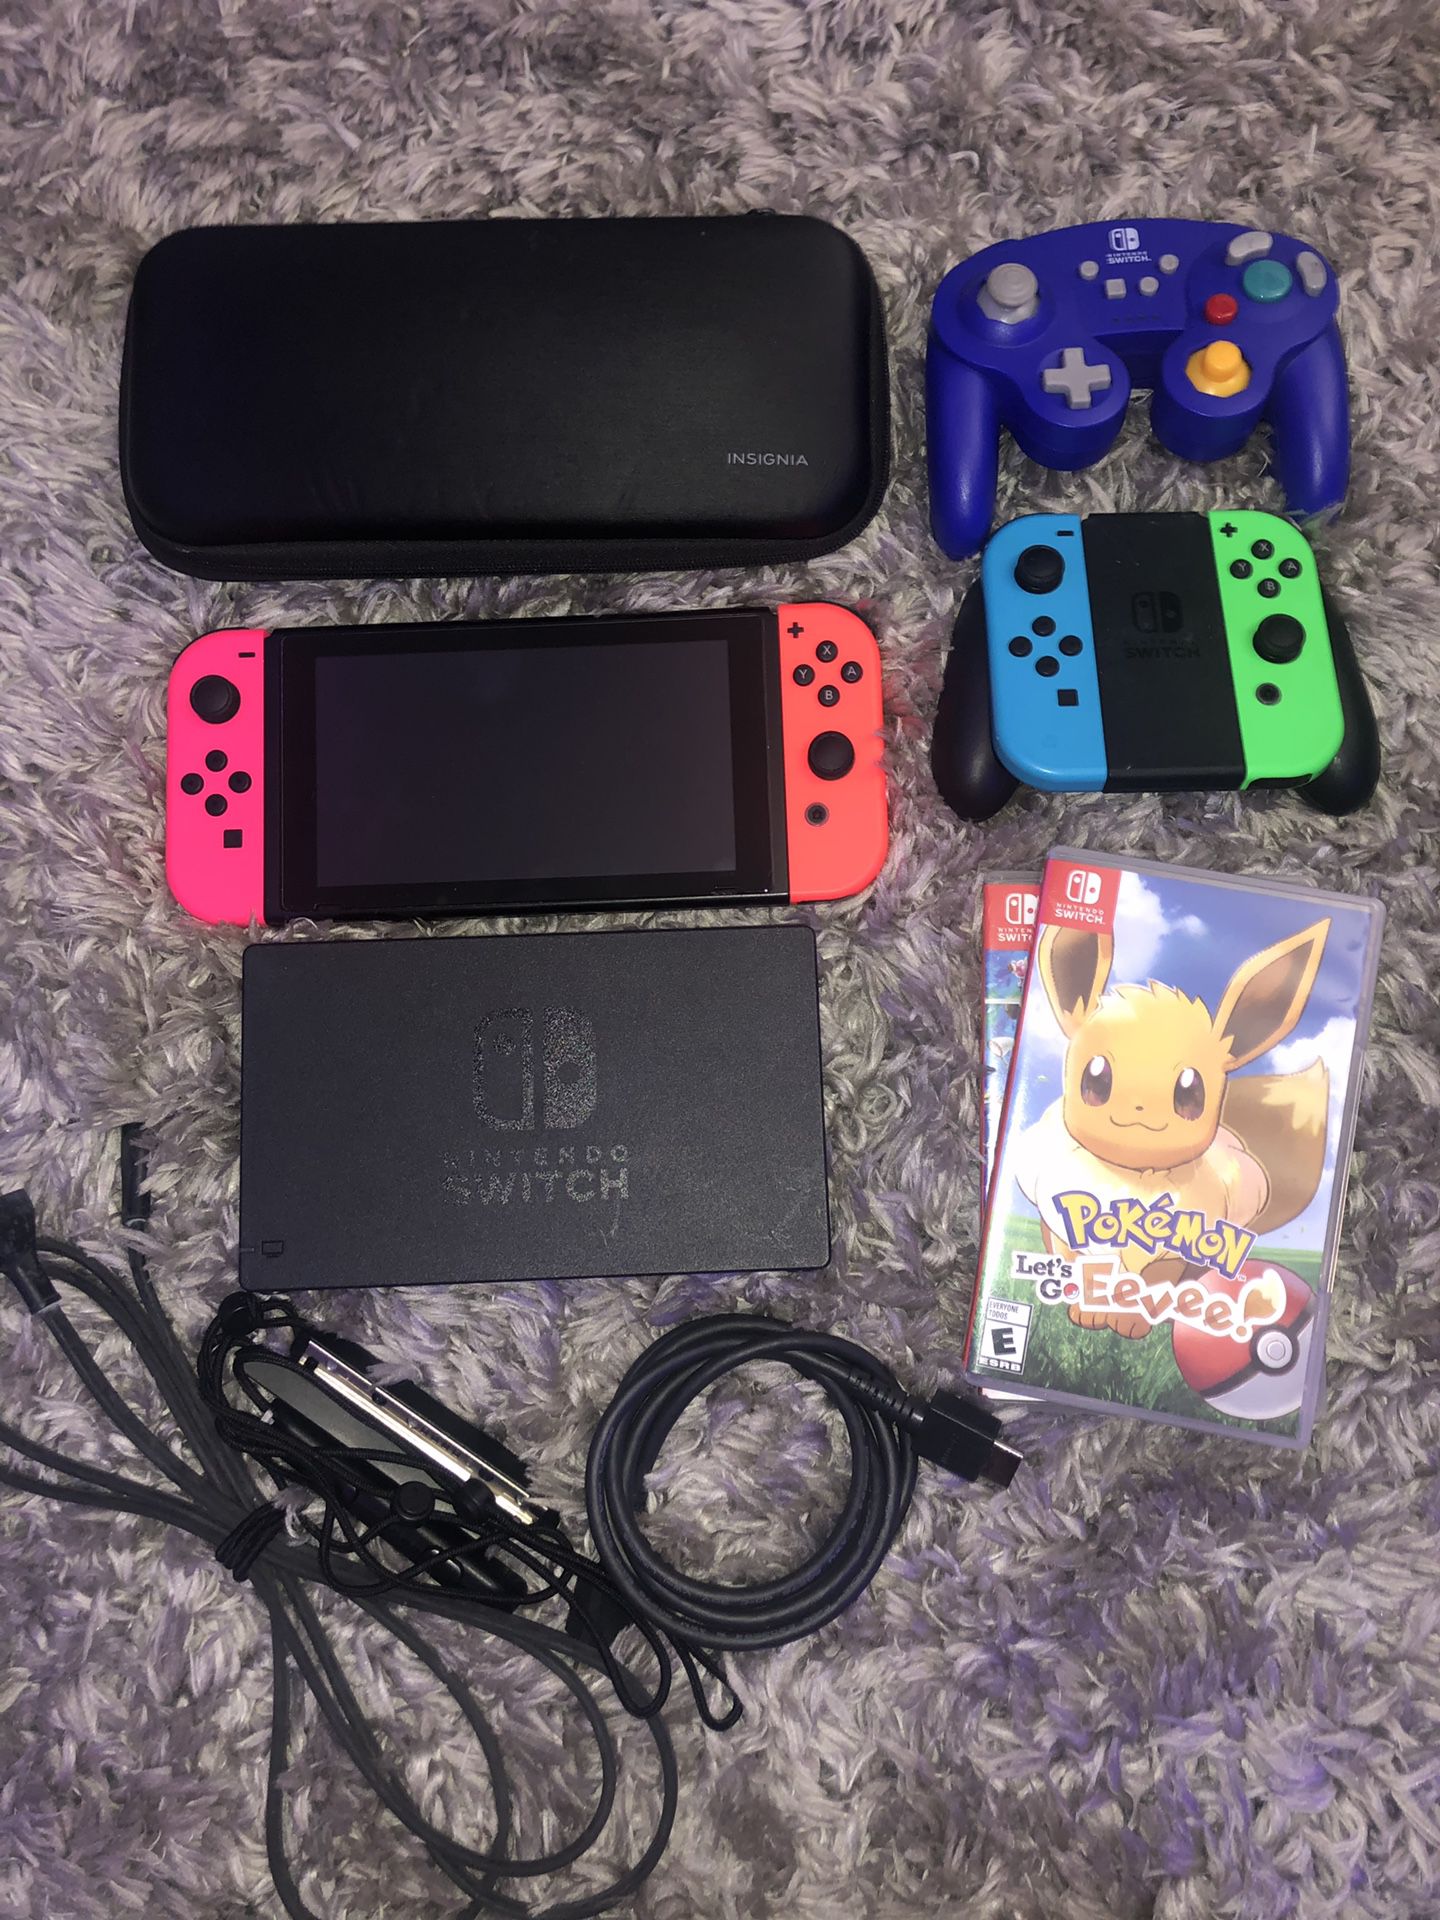 Nintendo switch package deal